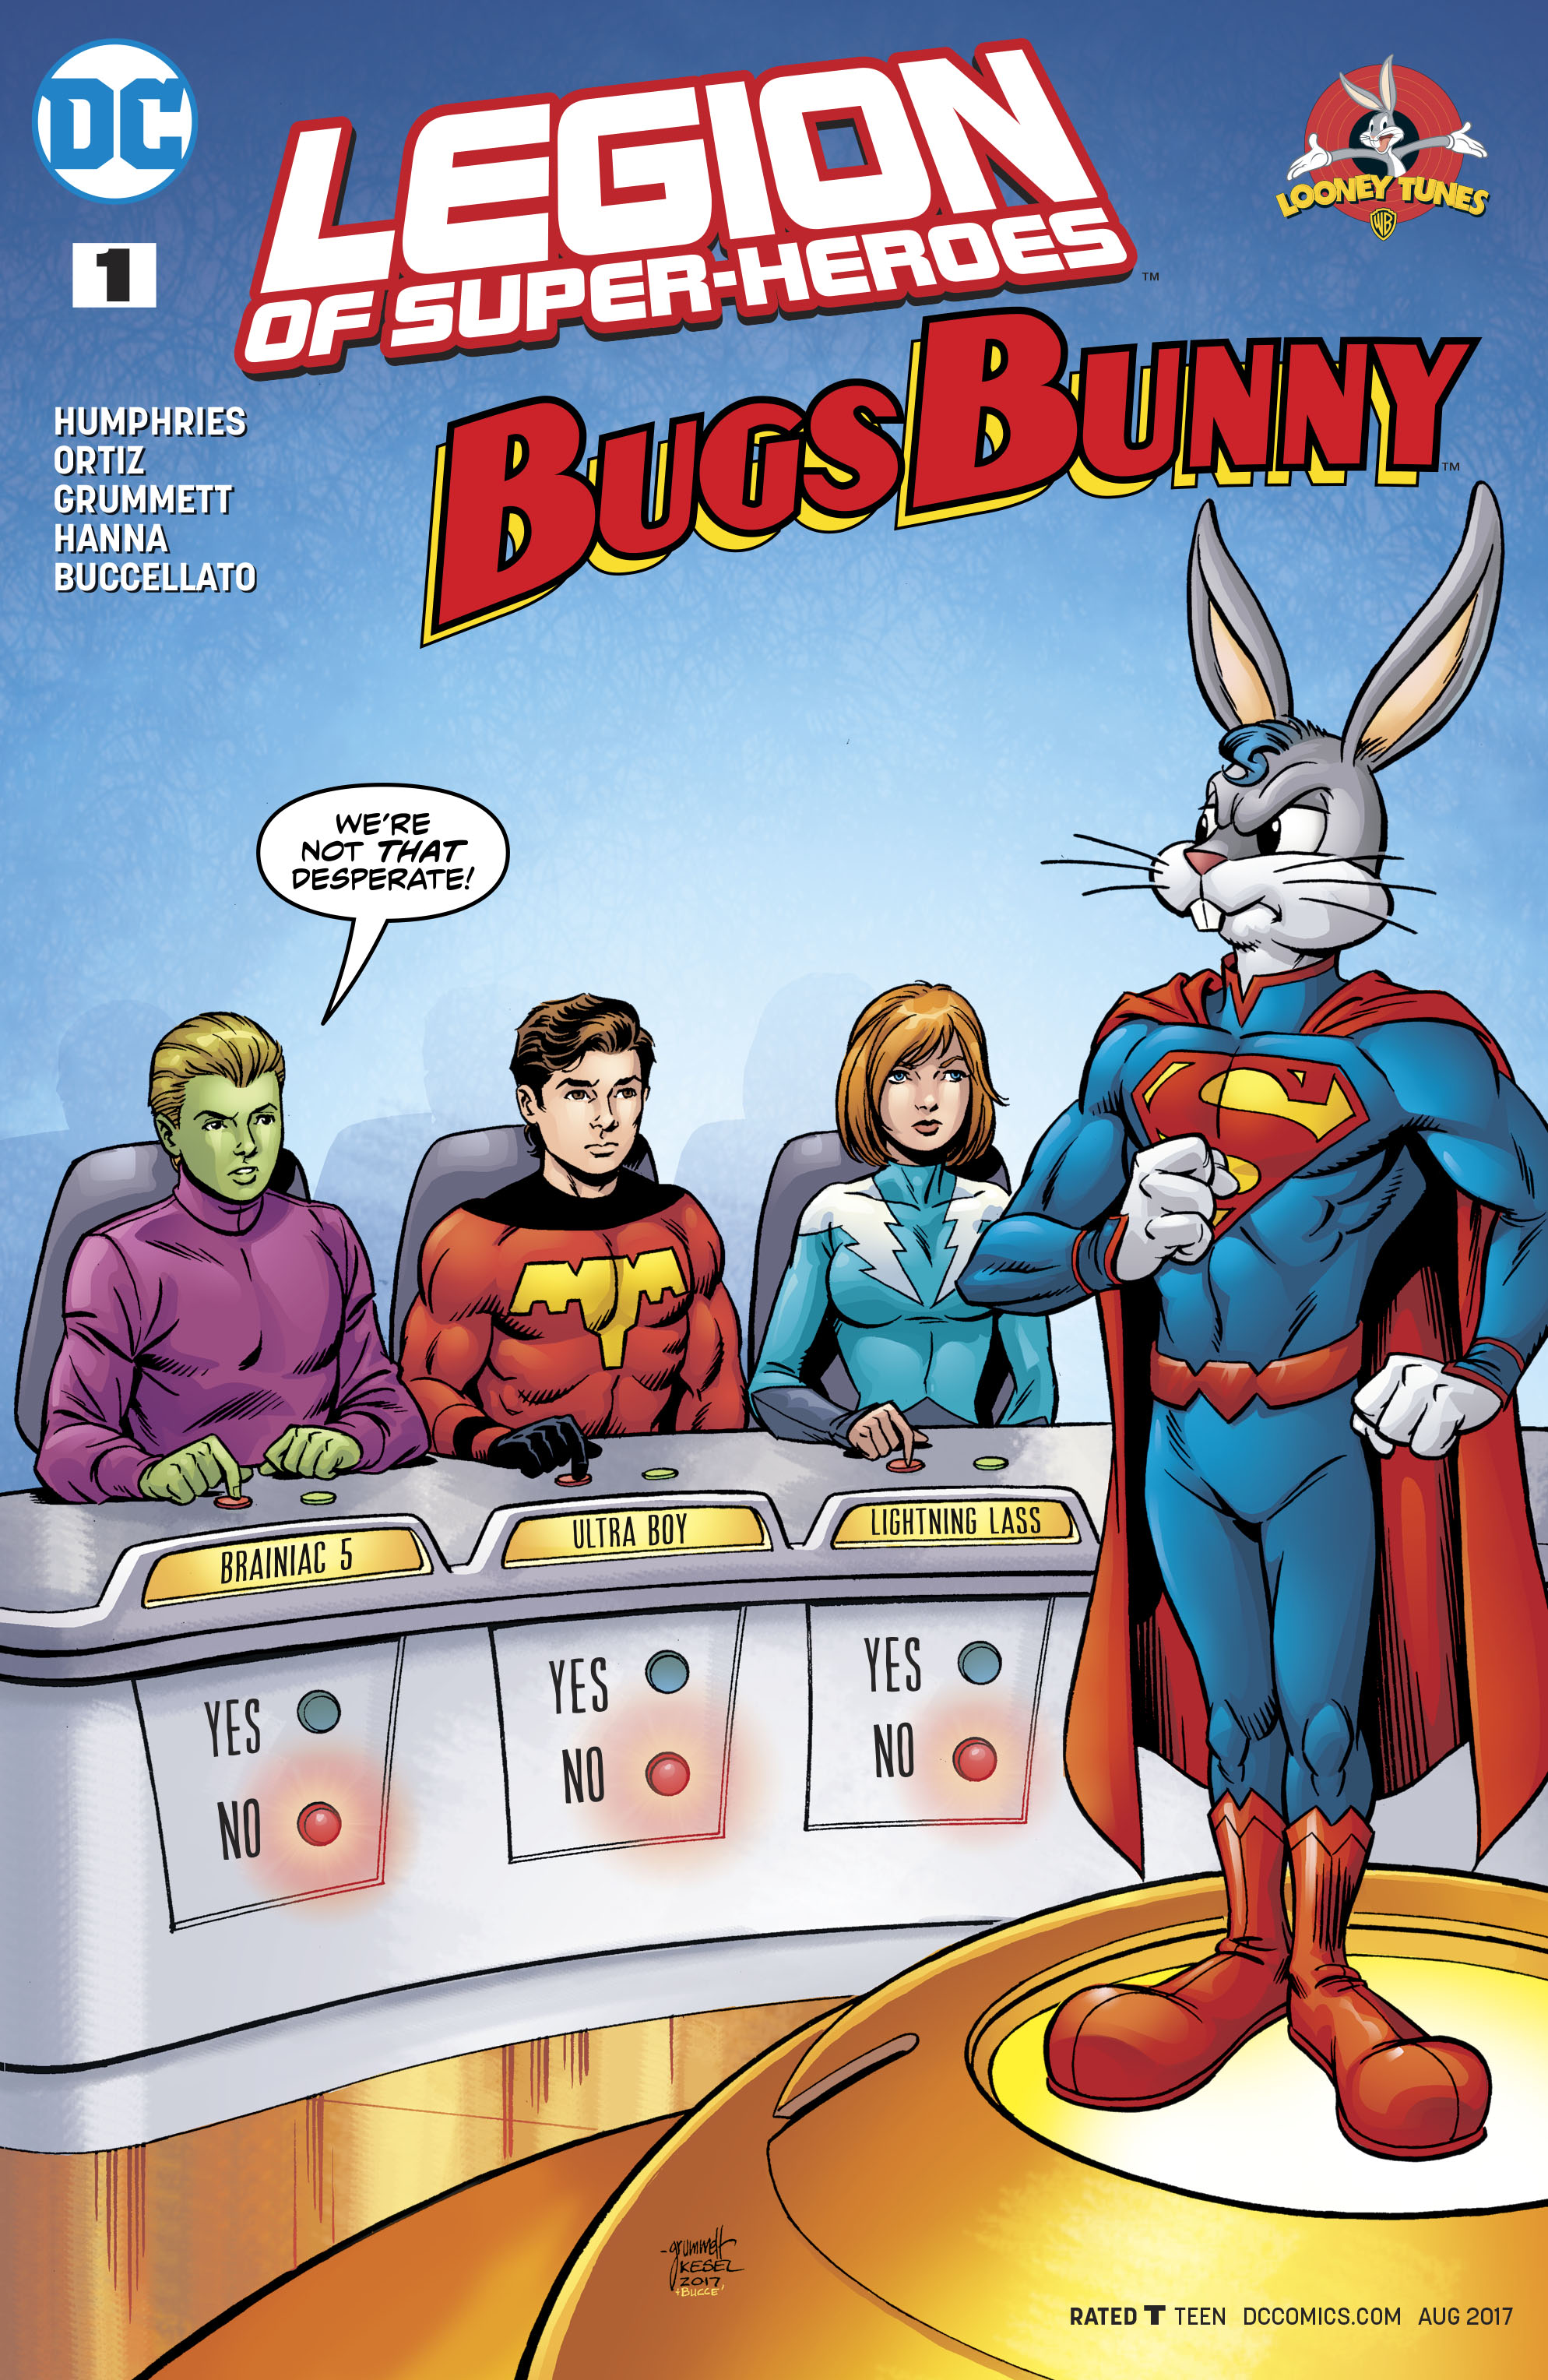 Read online Legion of Super-Heroes/Bugs Bunny Special comic -  Issue # Full - 1